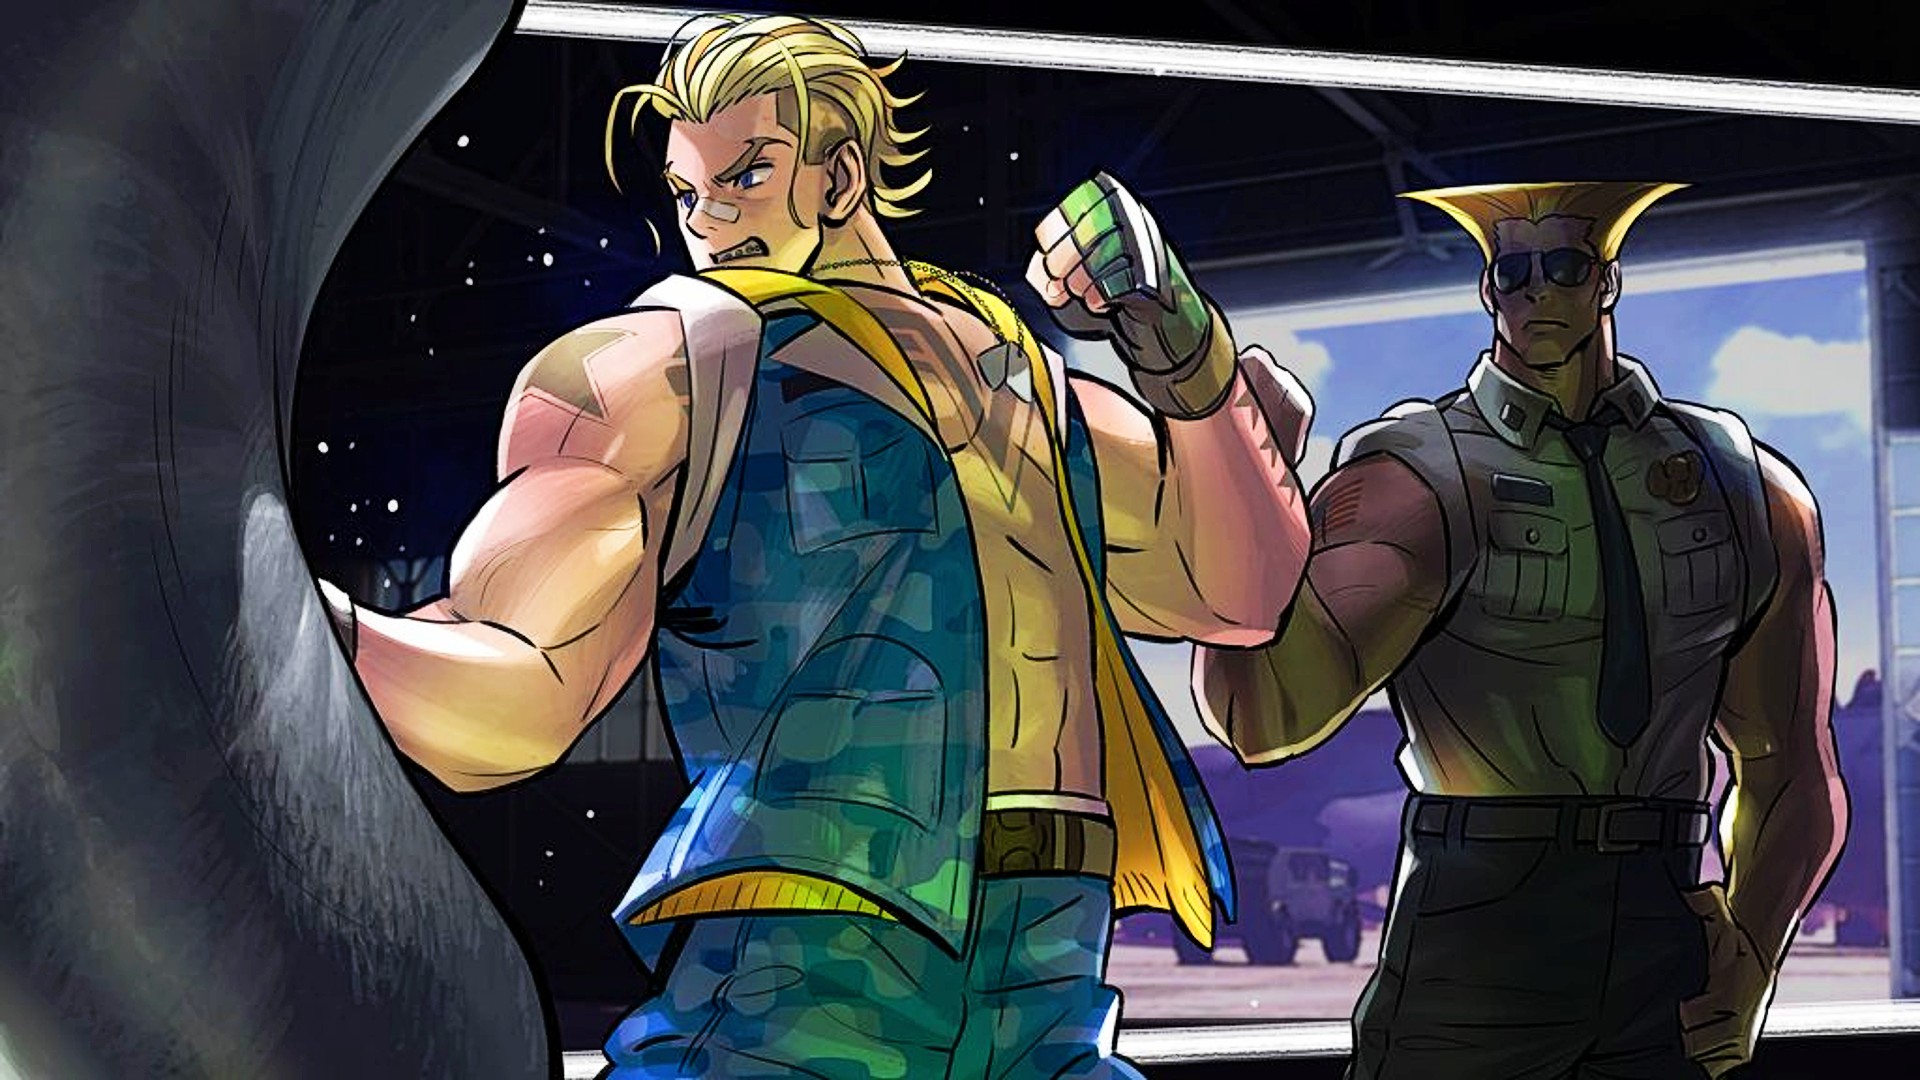 SFV’s Luke will be a key player in the next Street Fighter project